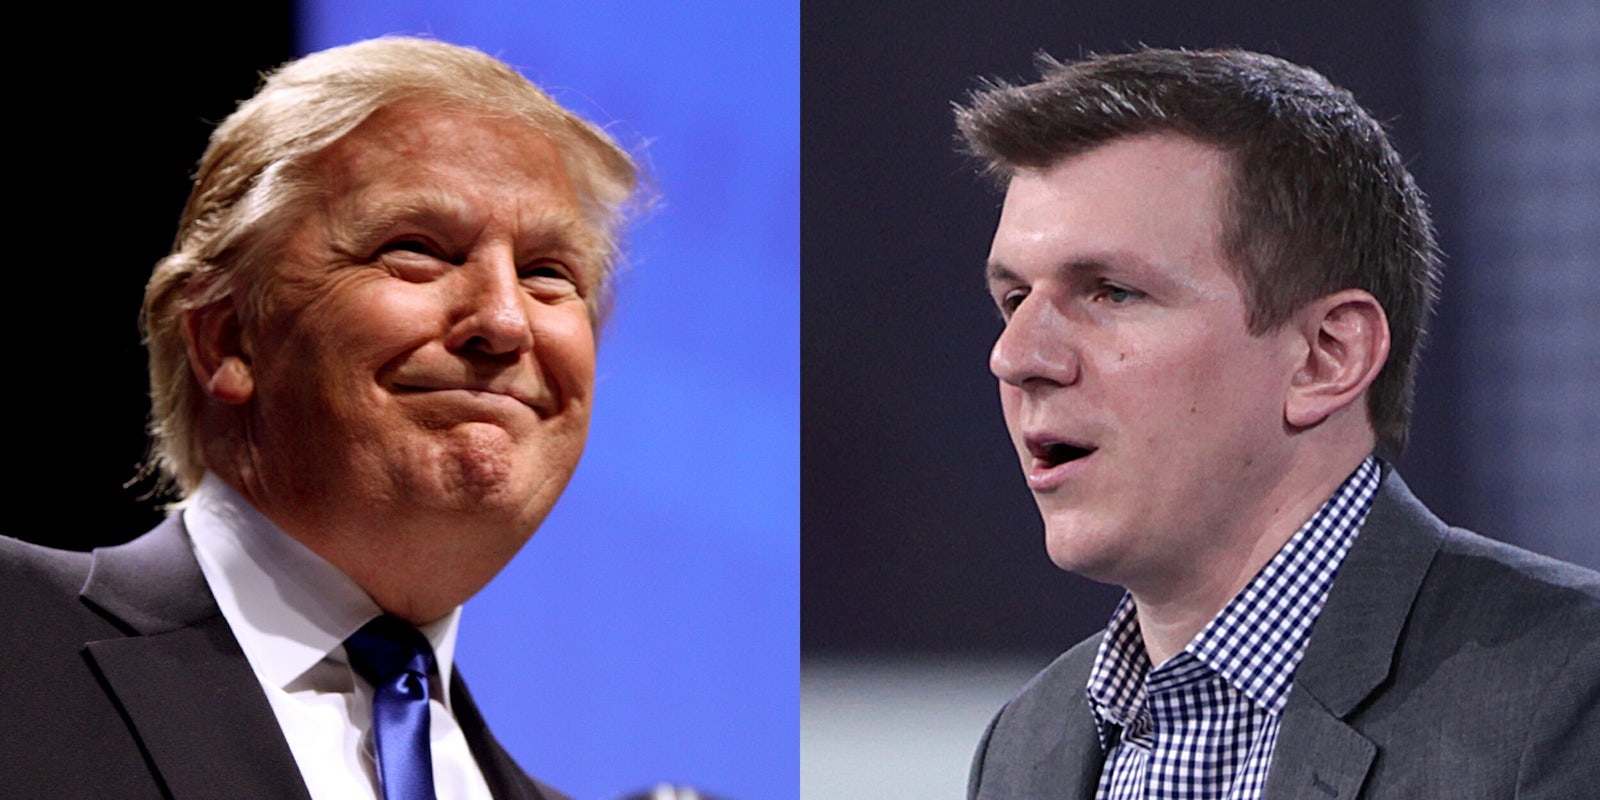 Donald Trump and James O'Keefe from Project Veritas